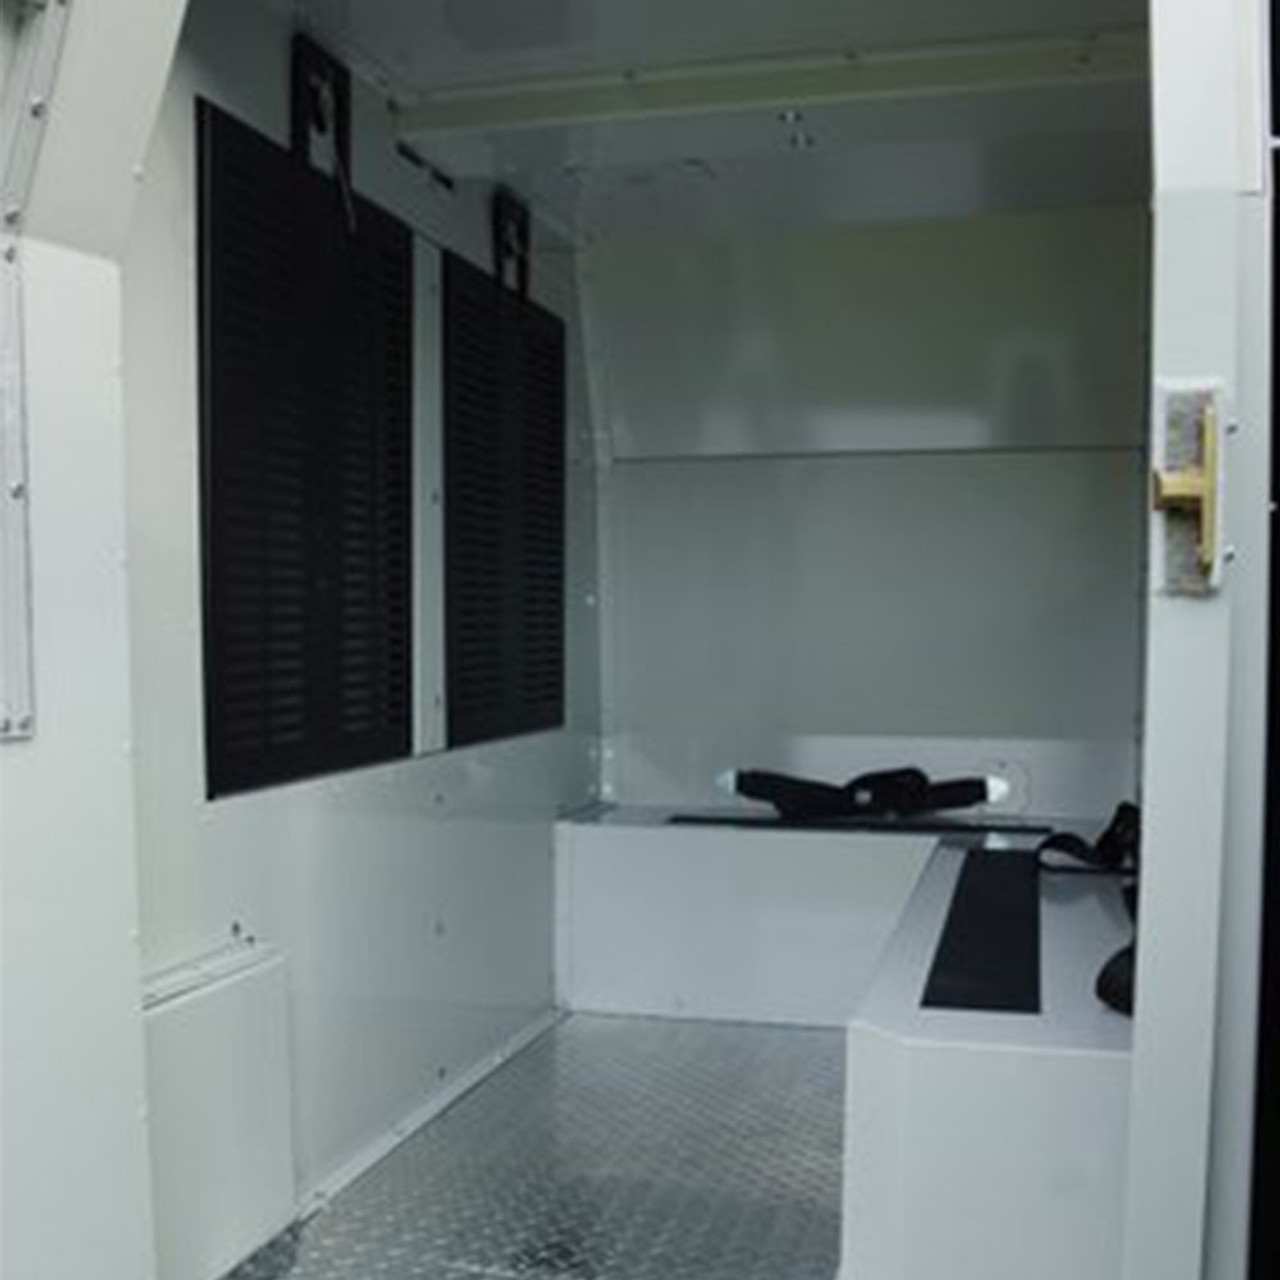 American Aluminum Dodge Promaster Inmate Transport Modular System, Standard Length, with Compartment Options